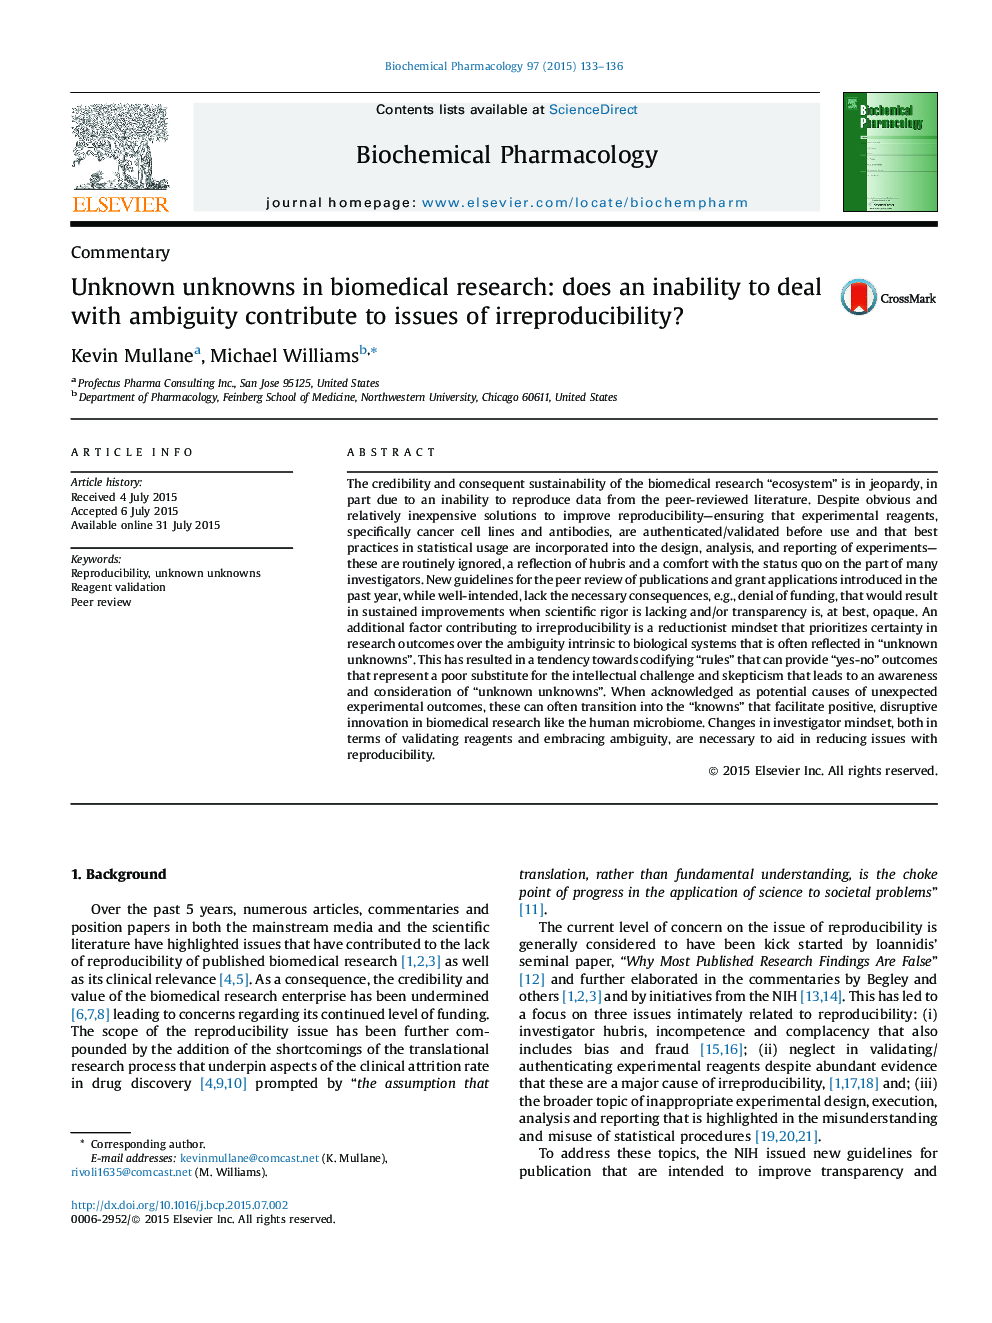 Unknown unknowns in biomedical research: does an inability to deal with ambiguity contribute to issues of irreproducibility?